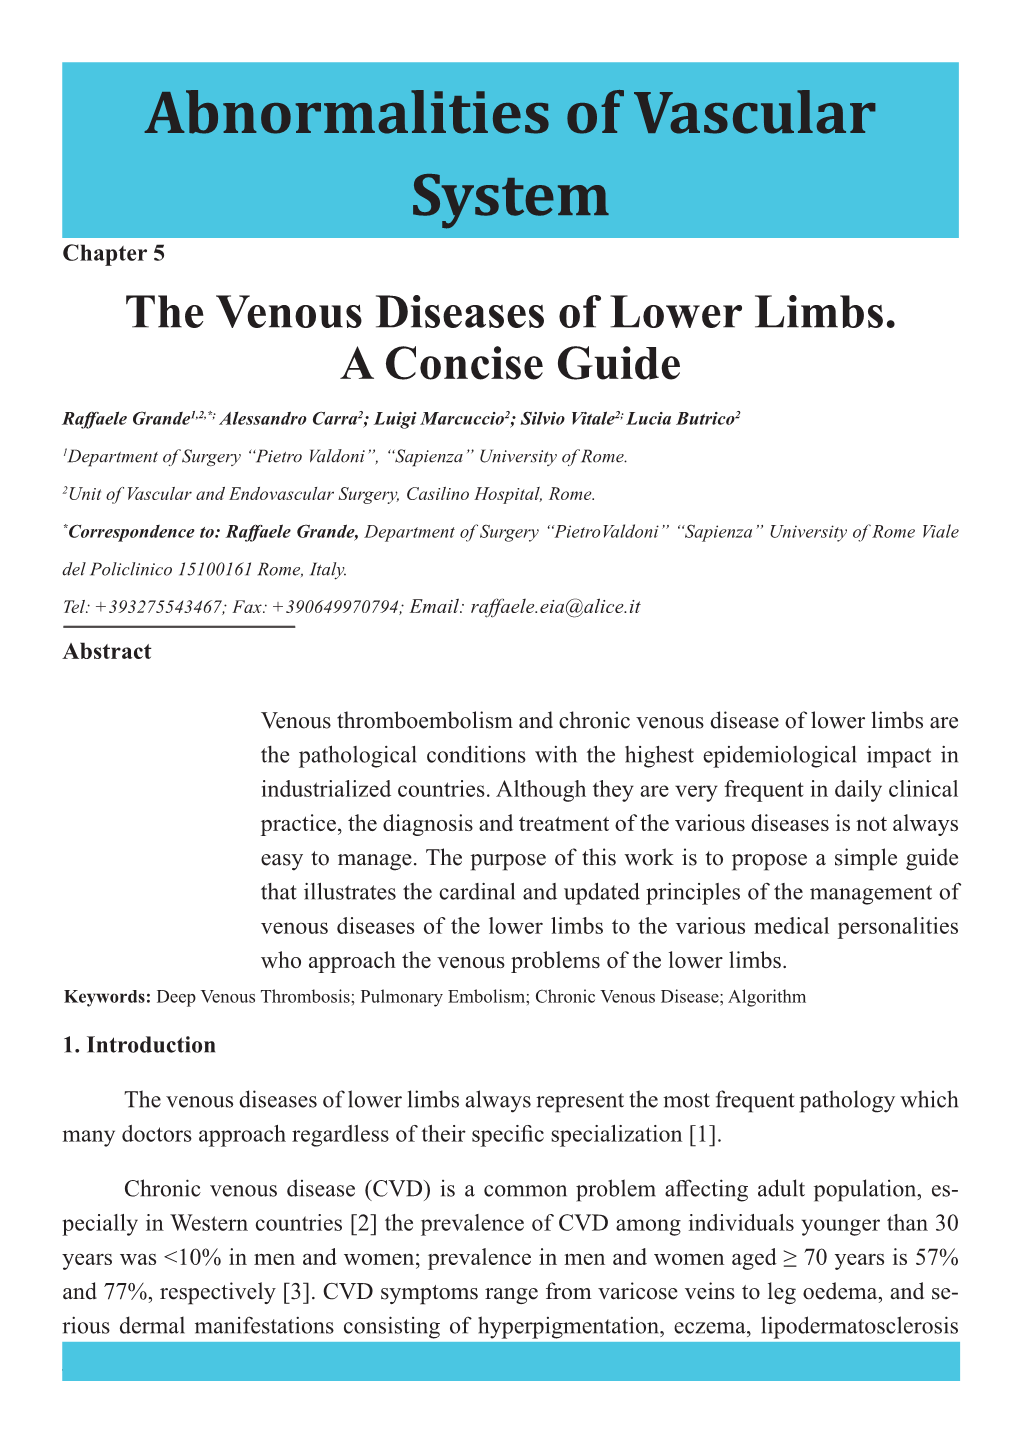 The Venous Diseases of Lower Limbs. a Concise Guide